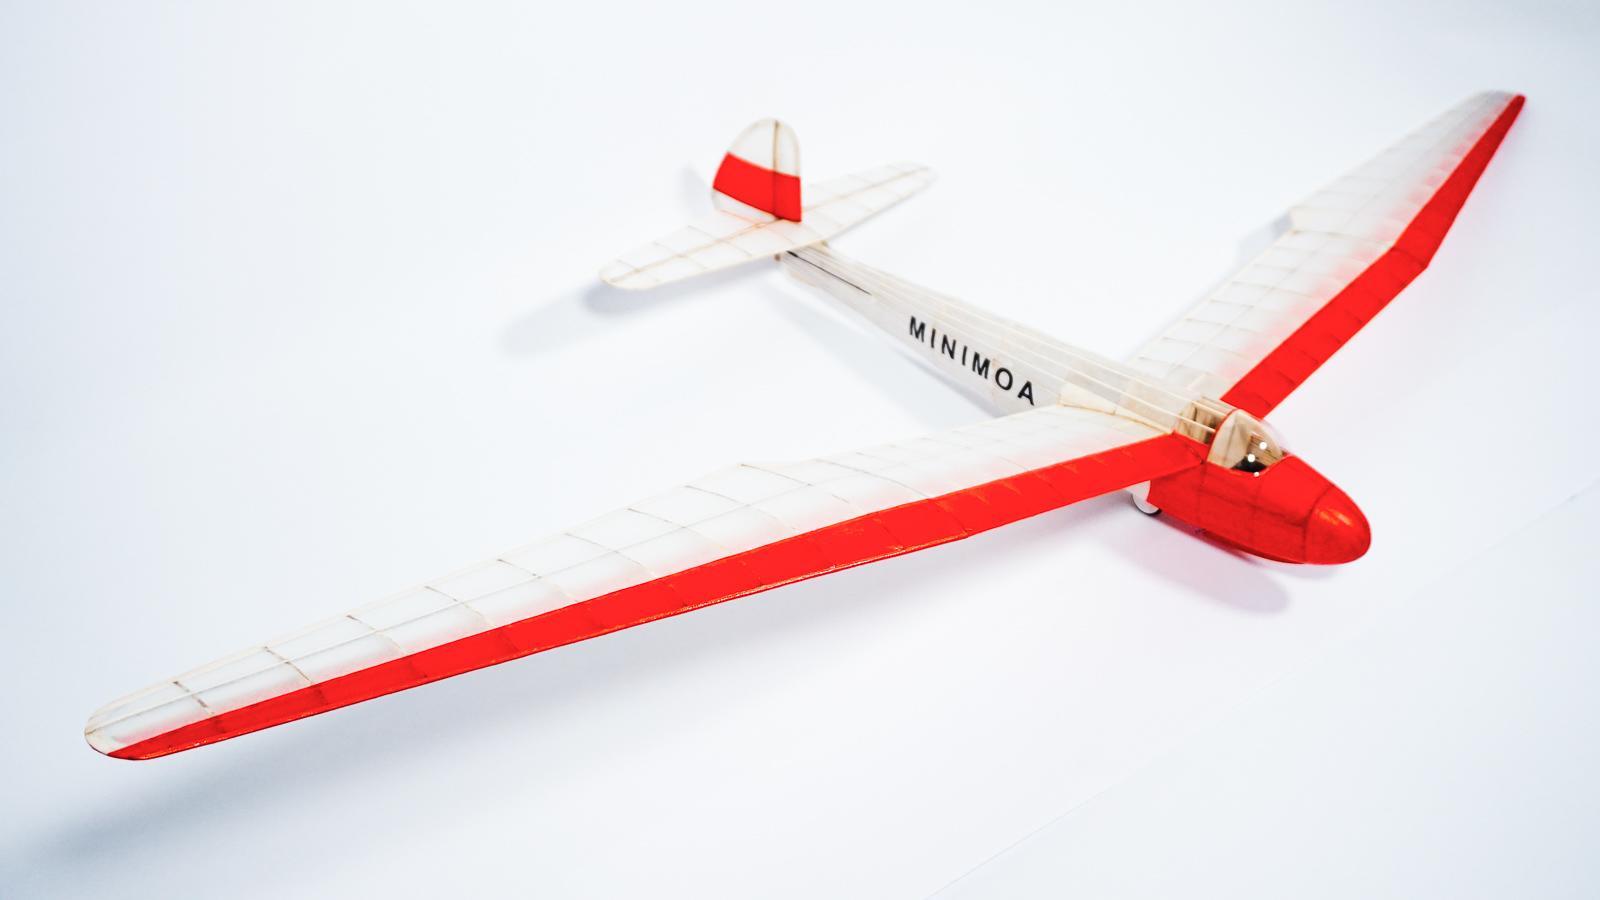 Rc Balsa Glider Kits: Types and Sizes of RC Balsa Glider Kits: A Quick Guide